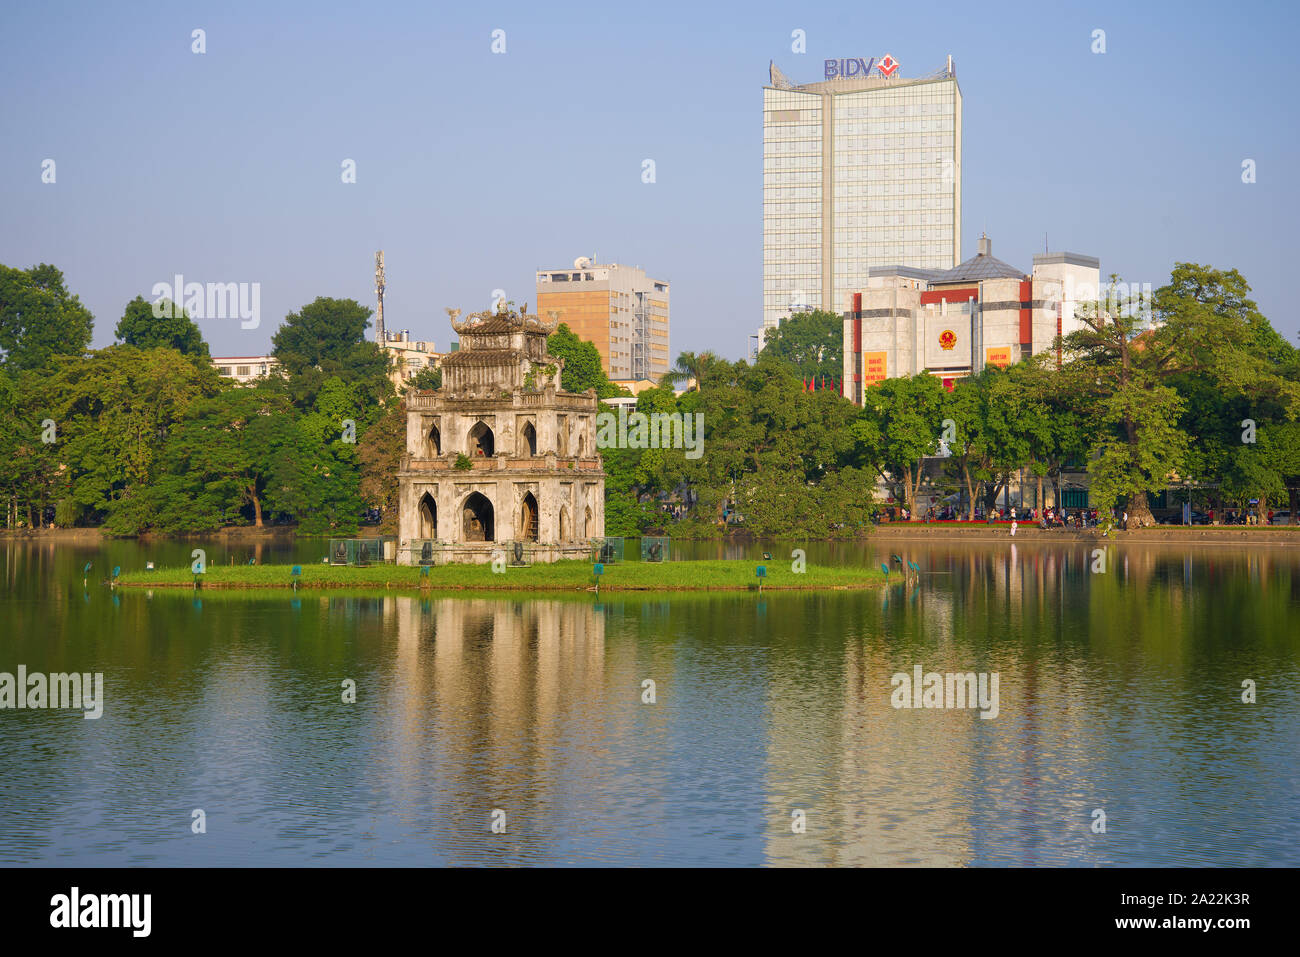 HANOI, VIETNAM - DECEMBER 13, 2015: Turtle tower on the background of modern buildings on the embankment of Hoan Kiem lake on a sunny morning Stock Photo